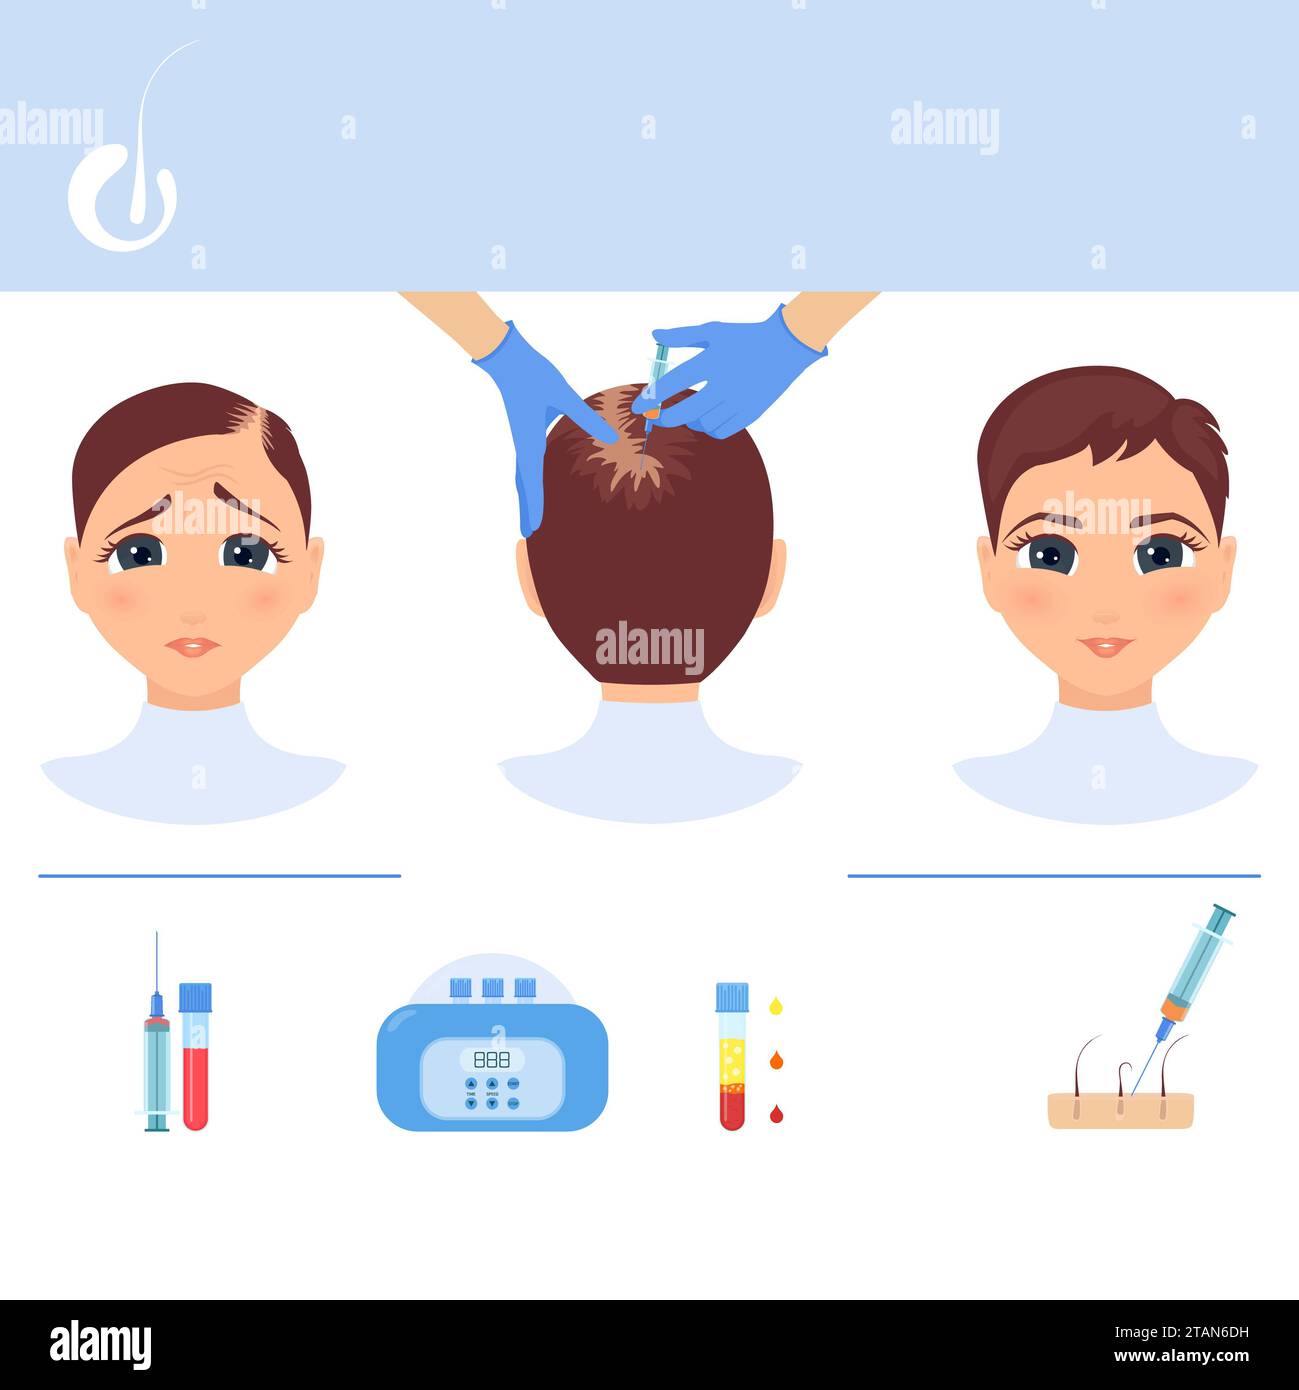 PRP for hair loss treatment, conceptual illustration Stock Photo